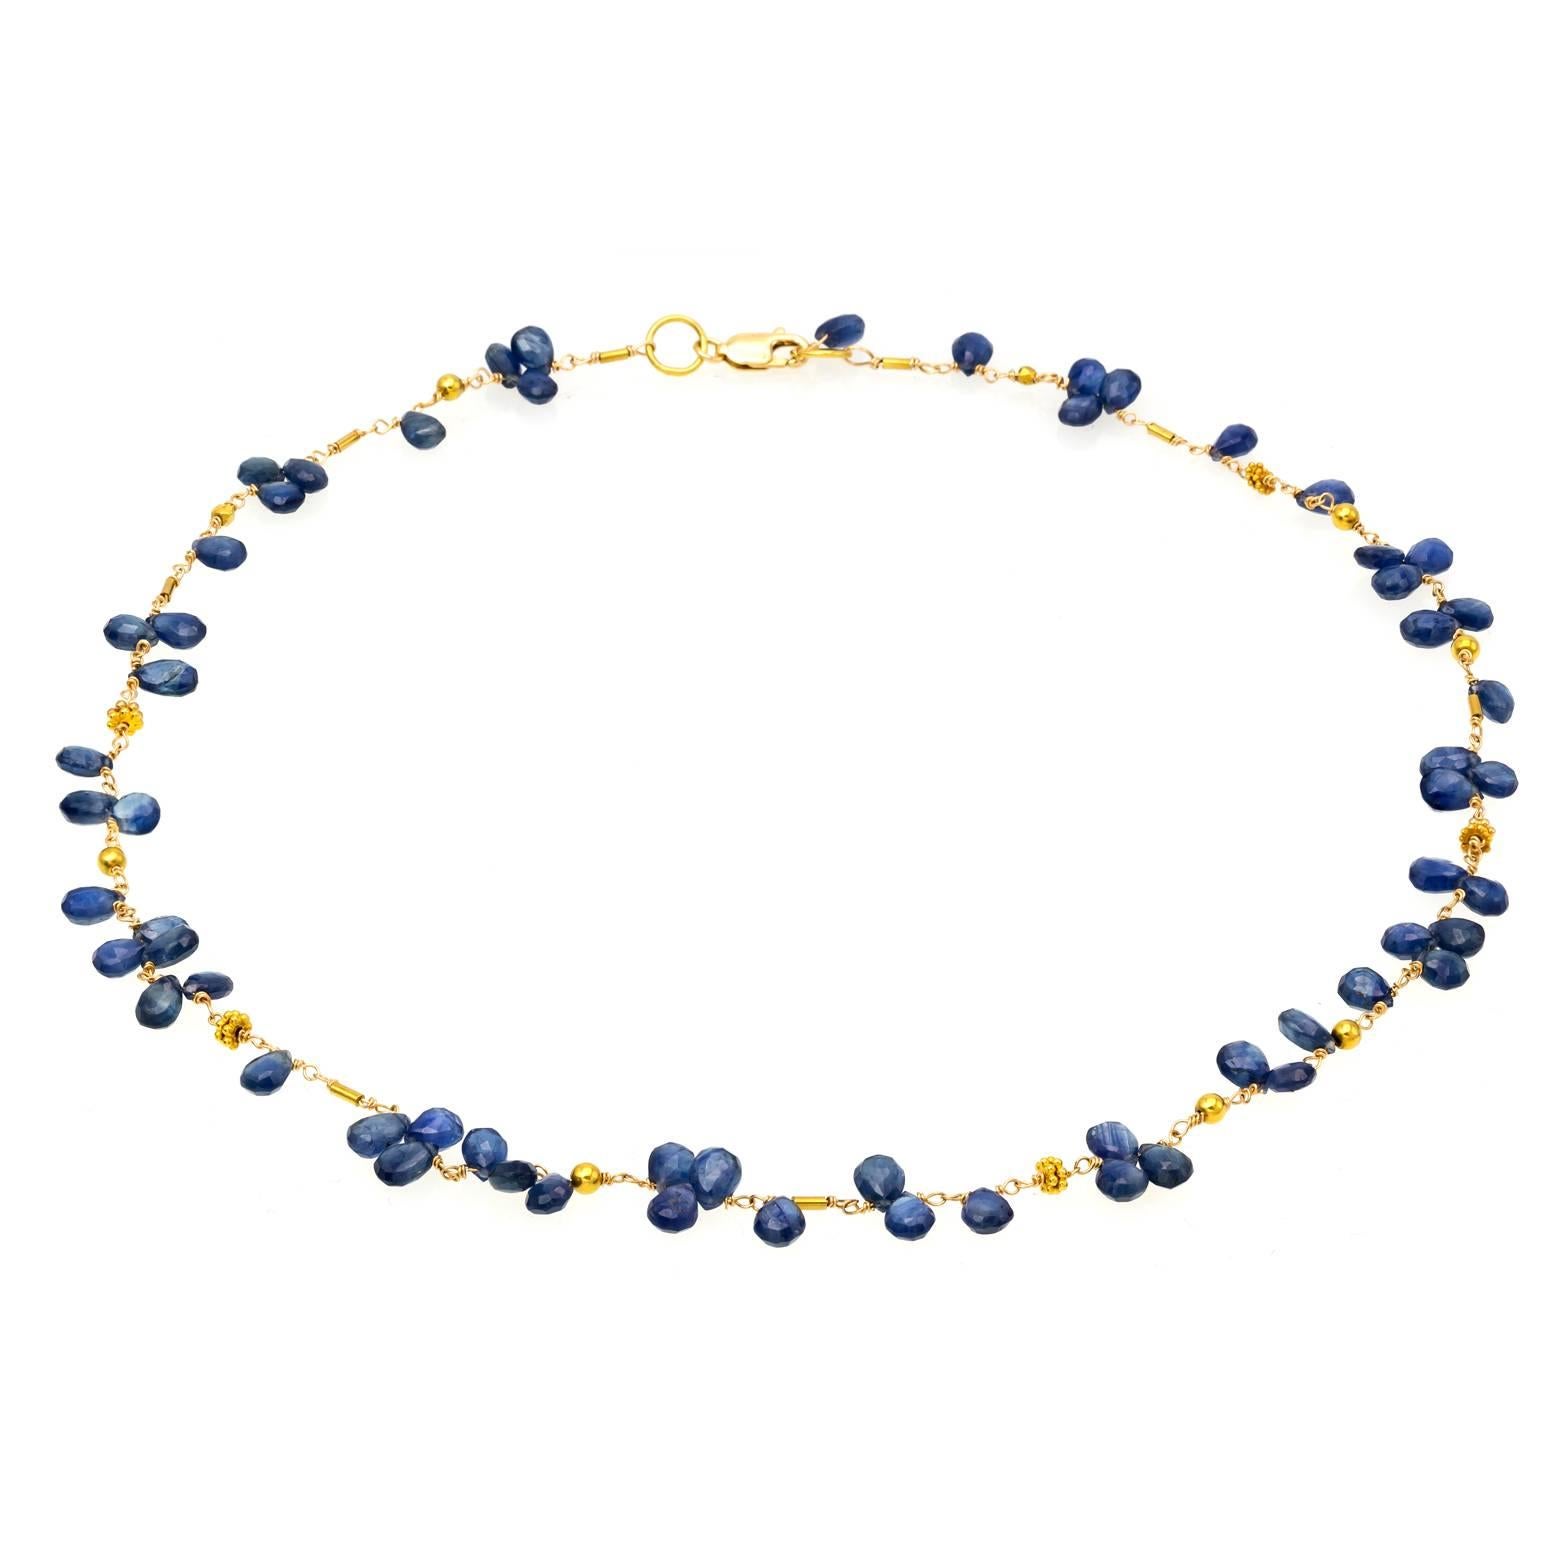 72 faceted blue sapphire briolettes create a delicate and feminine look with 18K yellow gold beads and chain. The blue sapphire beads looks like petals strung along a shiny golden path. Unique, artistic, one of a kind and the length is adjustable